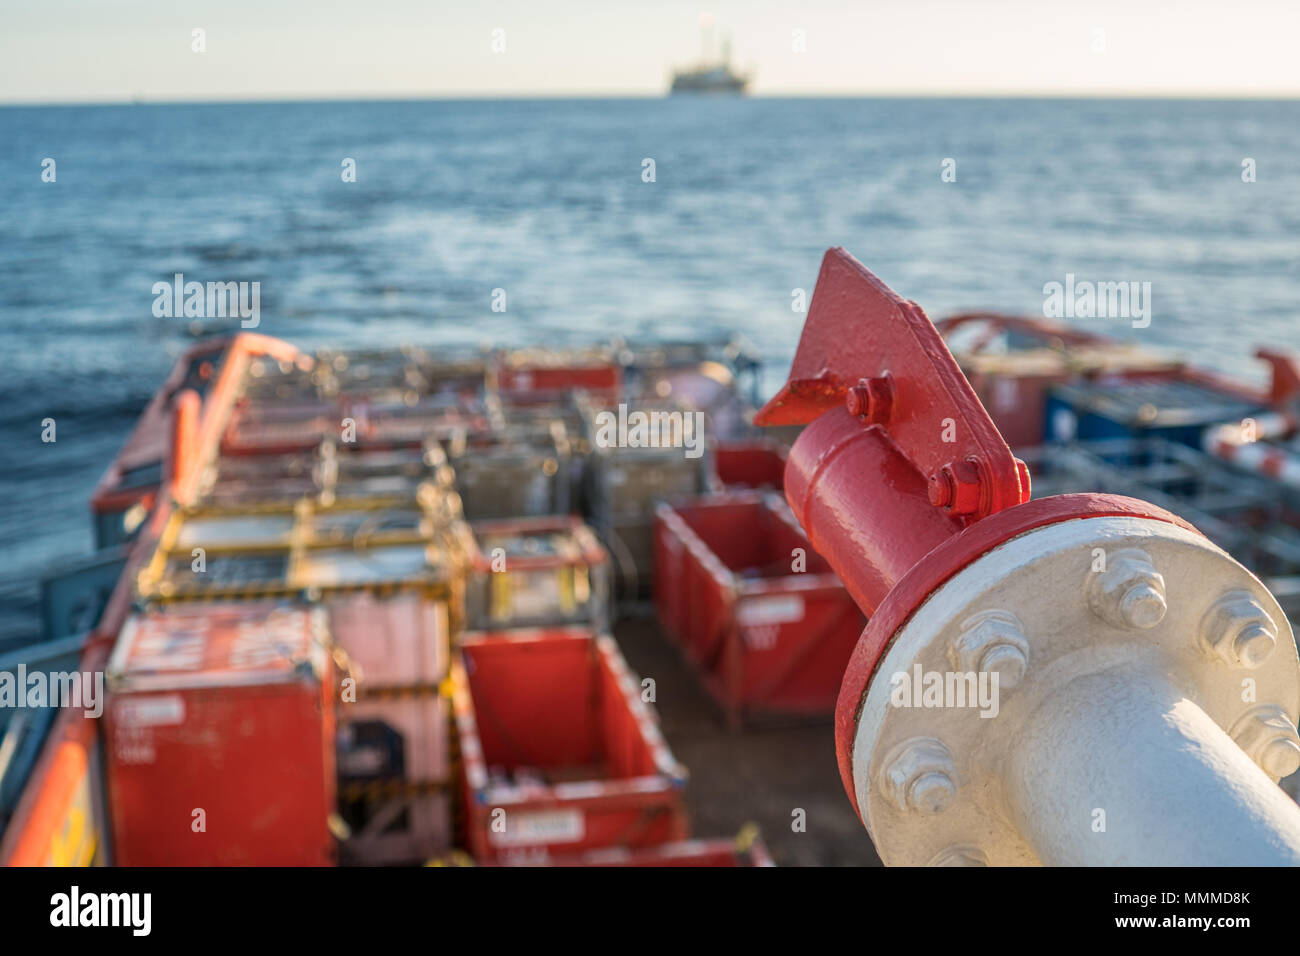 Closeup view of vessel fire fighting system, which covers main deck of offshore supply vessel at sea . Cargo containers are on background. Stock Photo